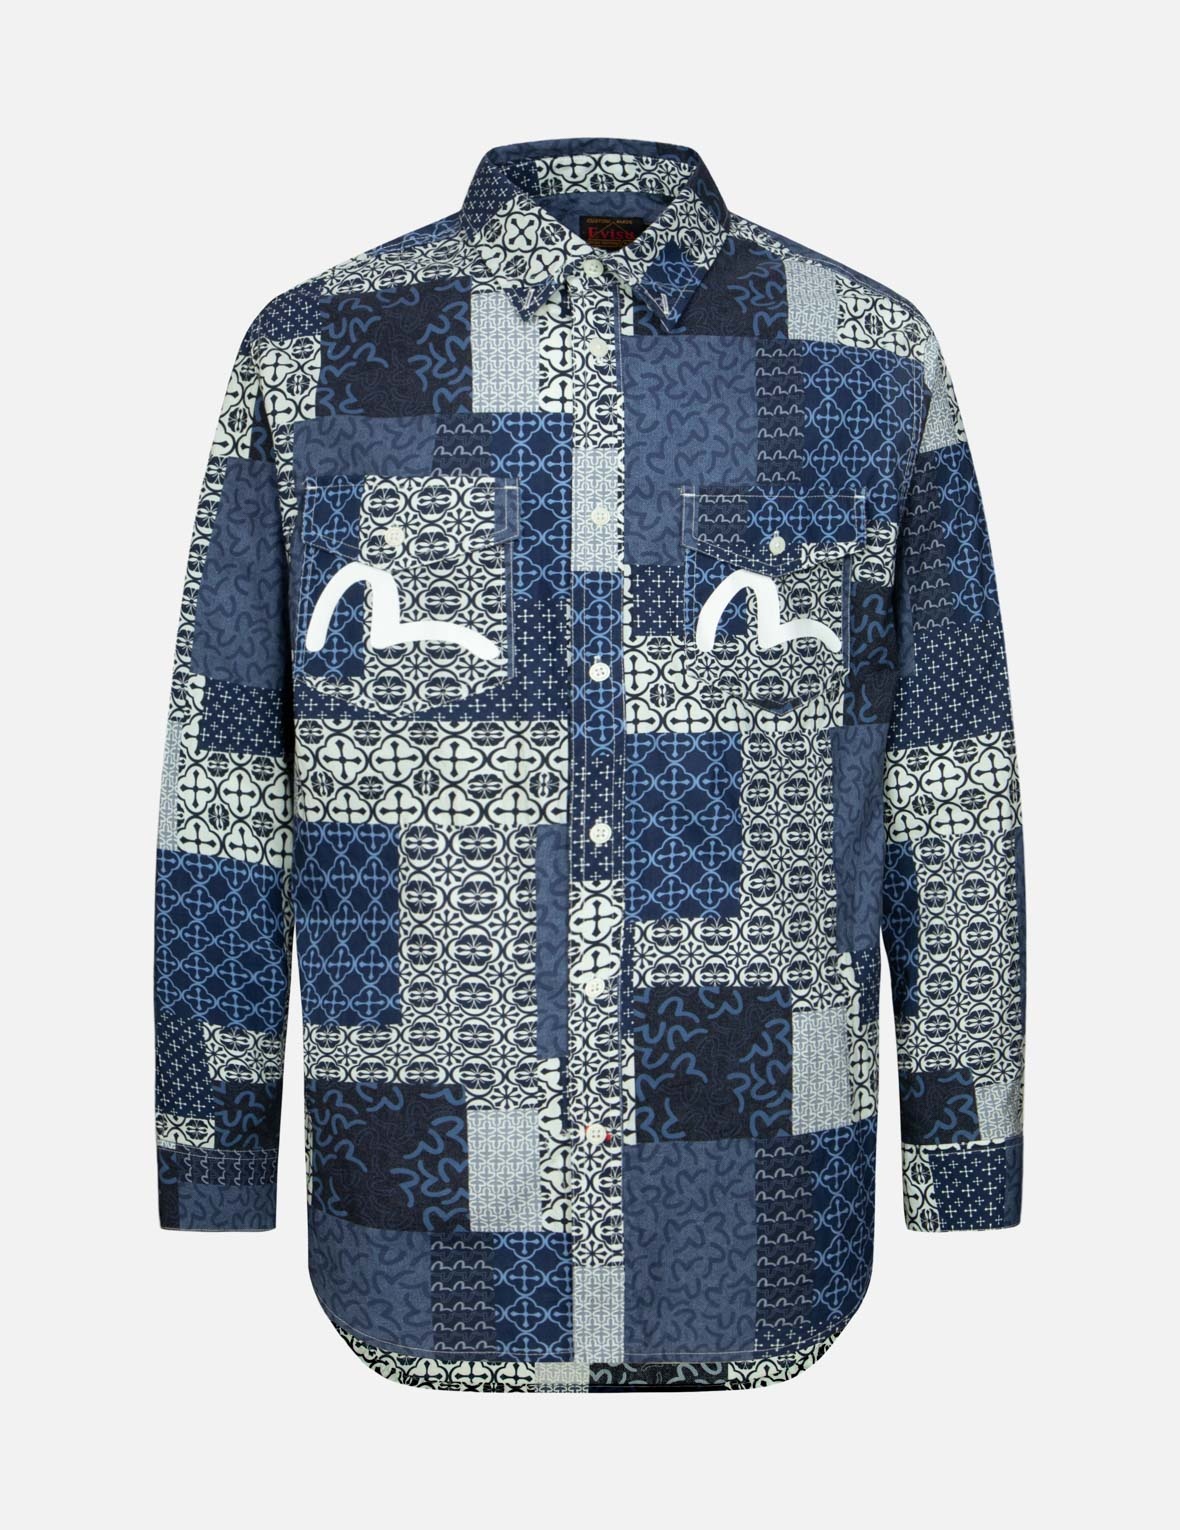 ALLOVER DERMATOGLYPHIC BLOCK AND SEAGULL PRINT RELAX FIT SHIRT - 1